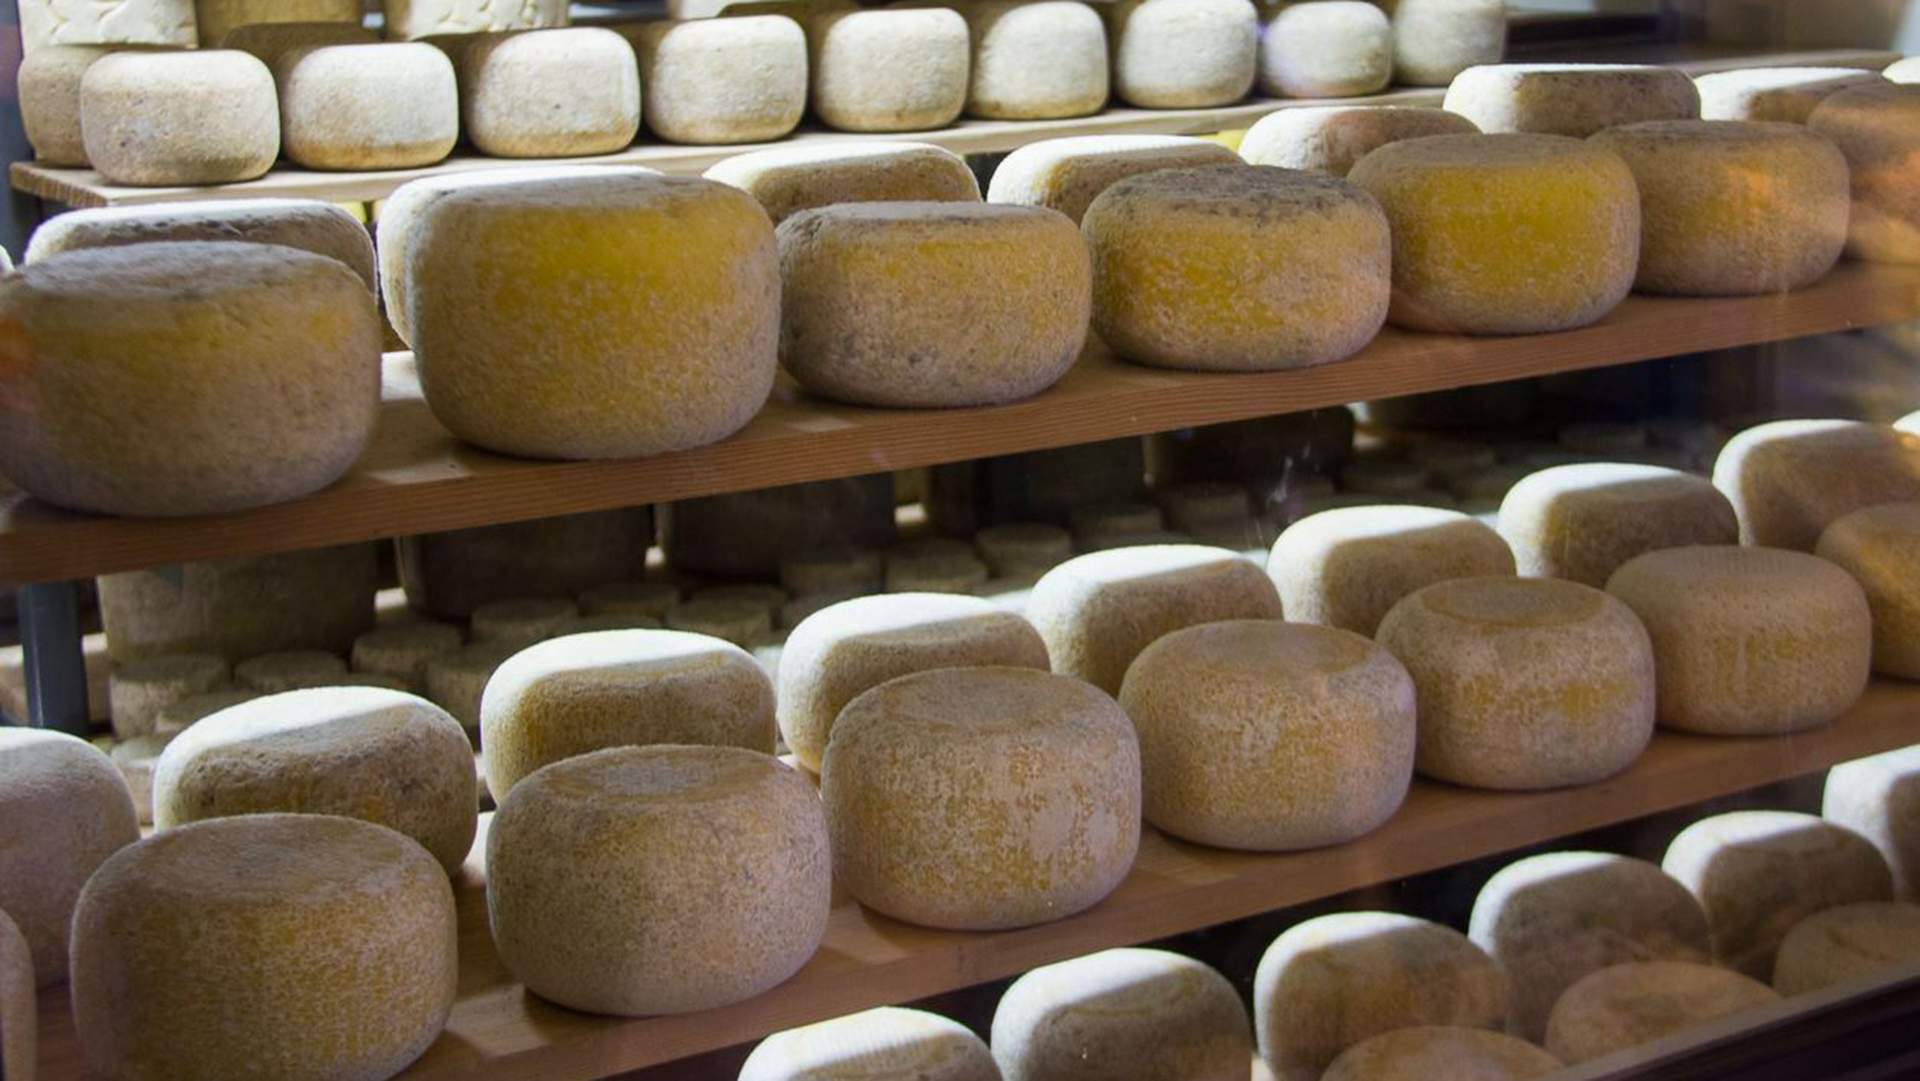 Melbourne's Getting a New Festival Dedicated to Australian Cheese